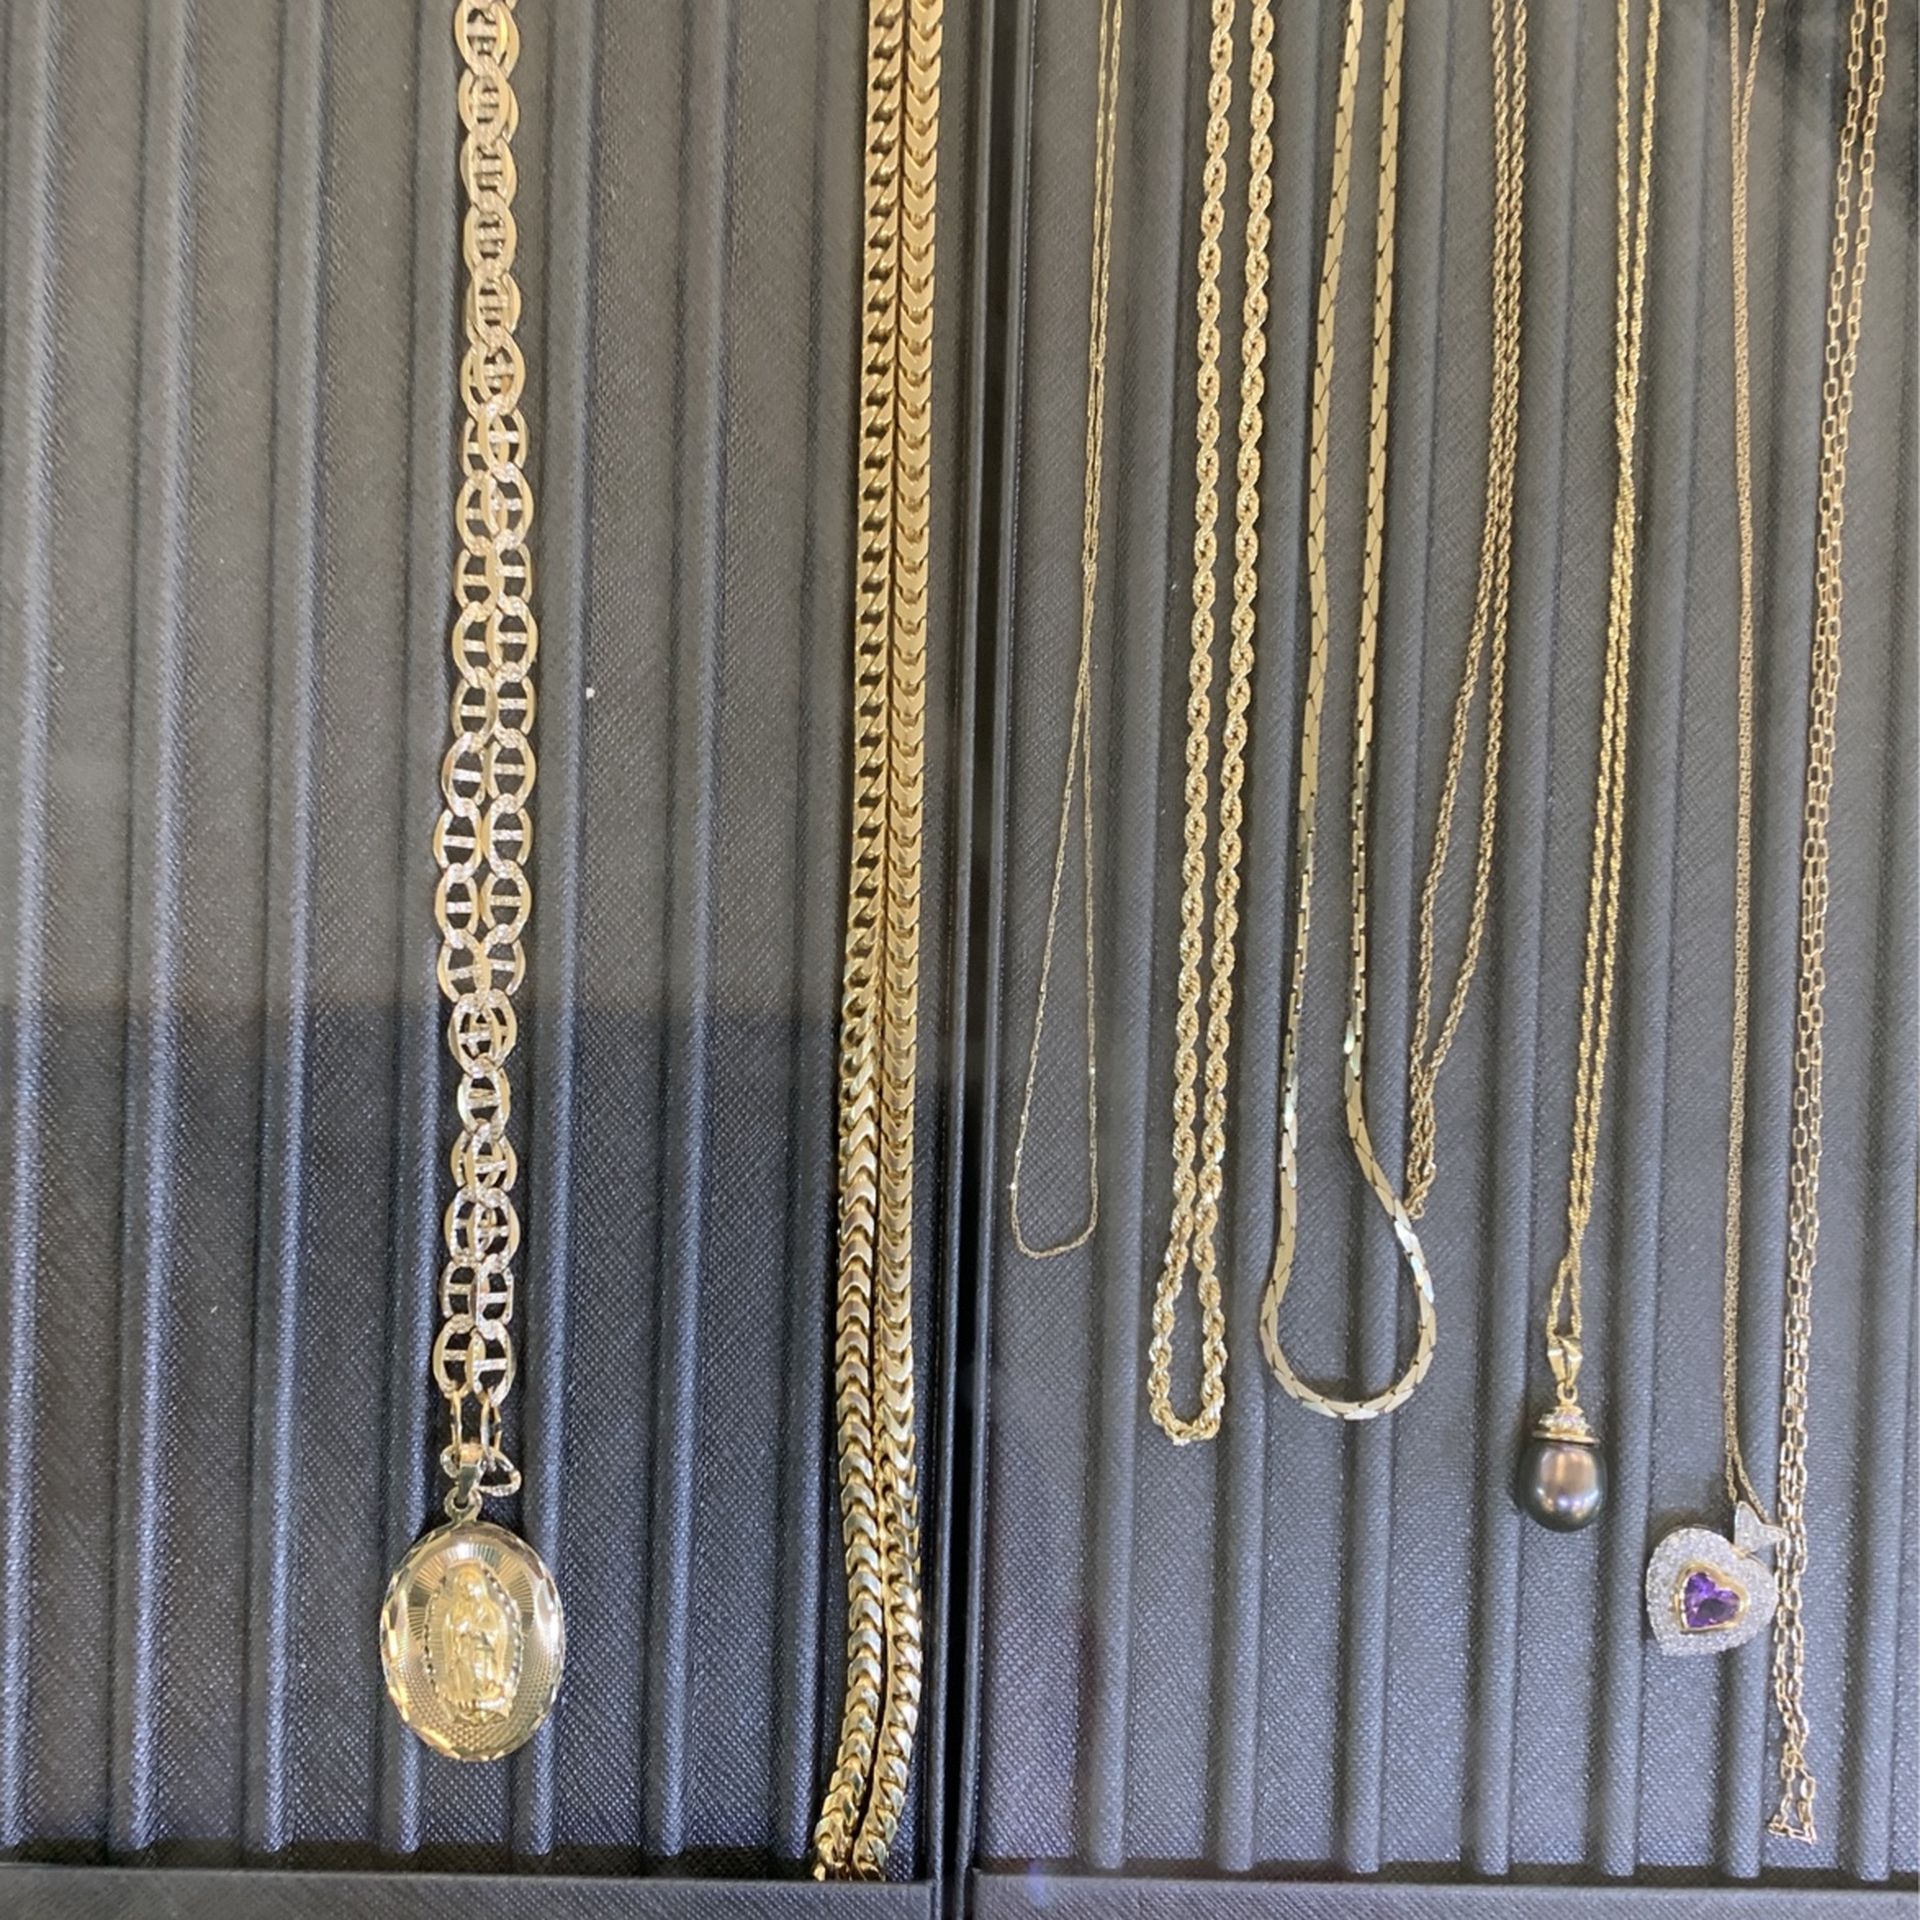 14k Gold 90g Chain 2nd From Left